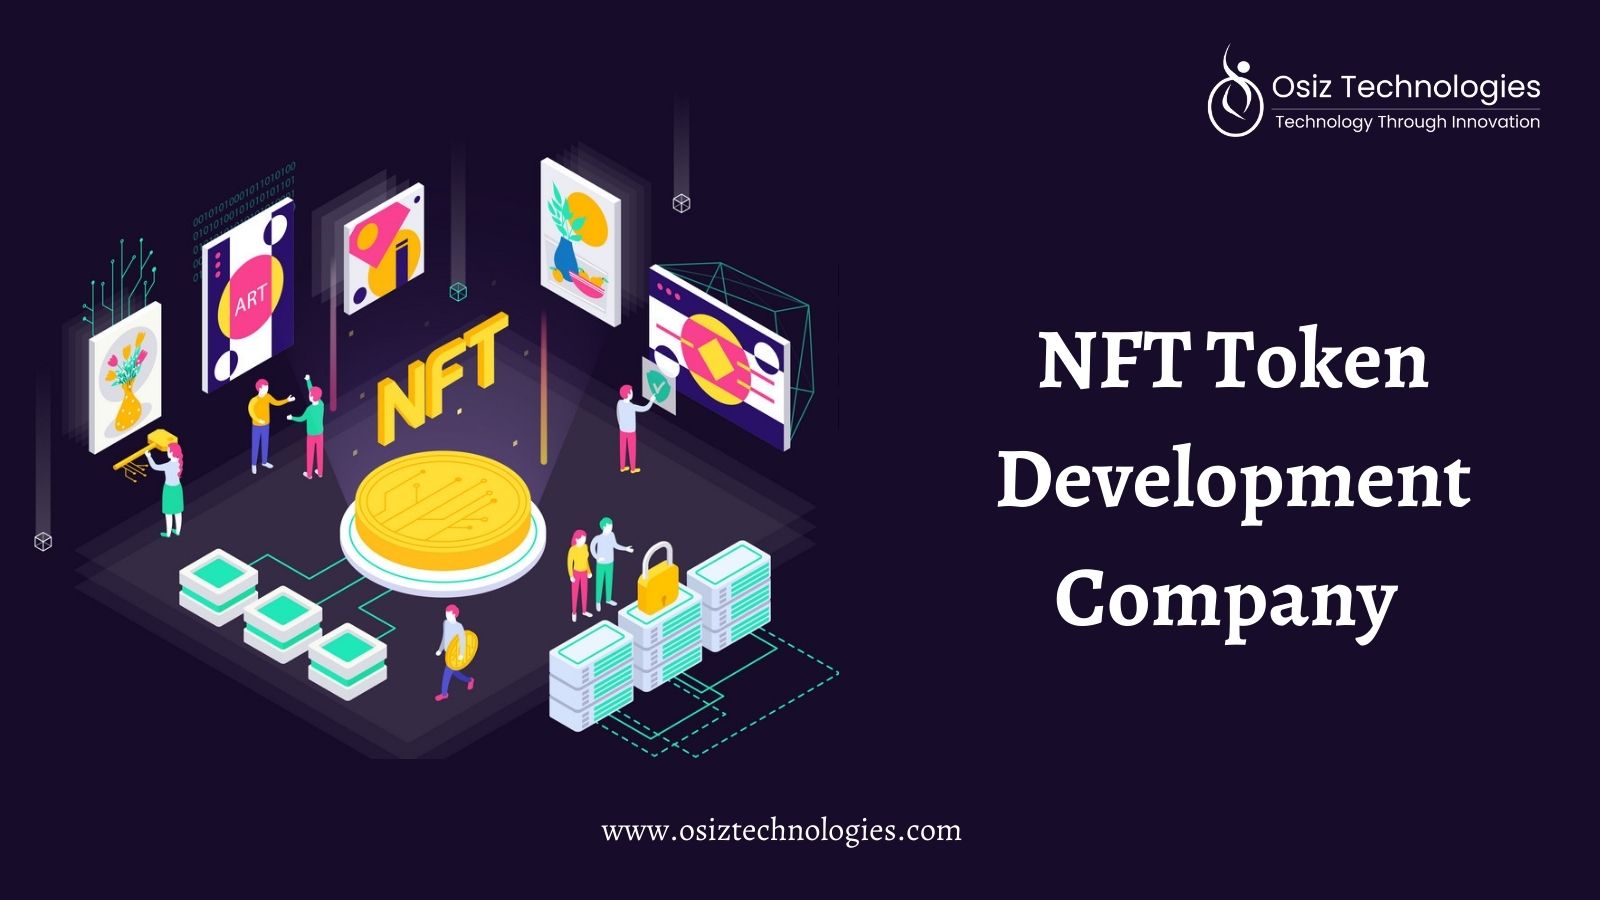 Article about To Create Your own NFT Token Now - NFT Token Development Company 